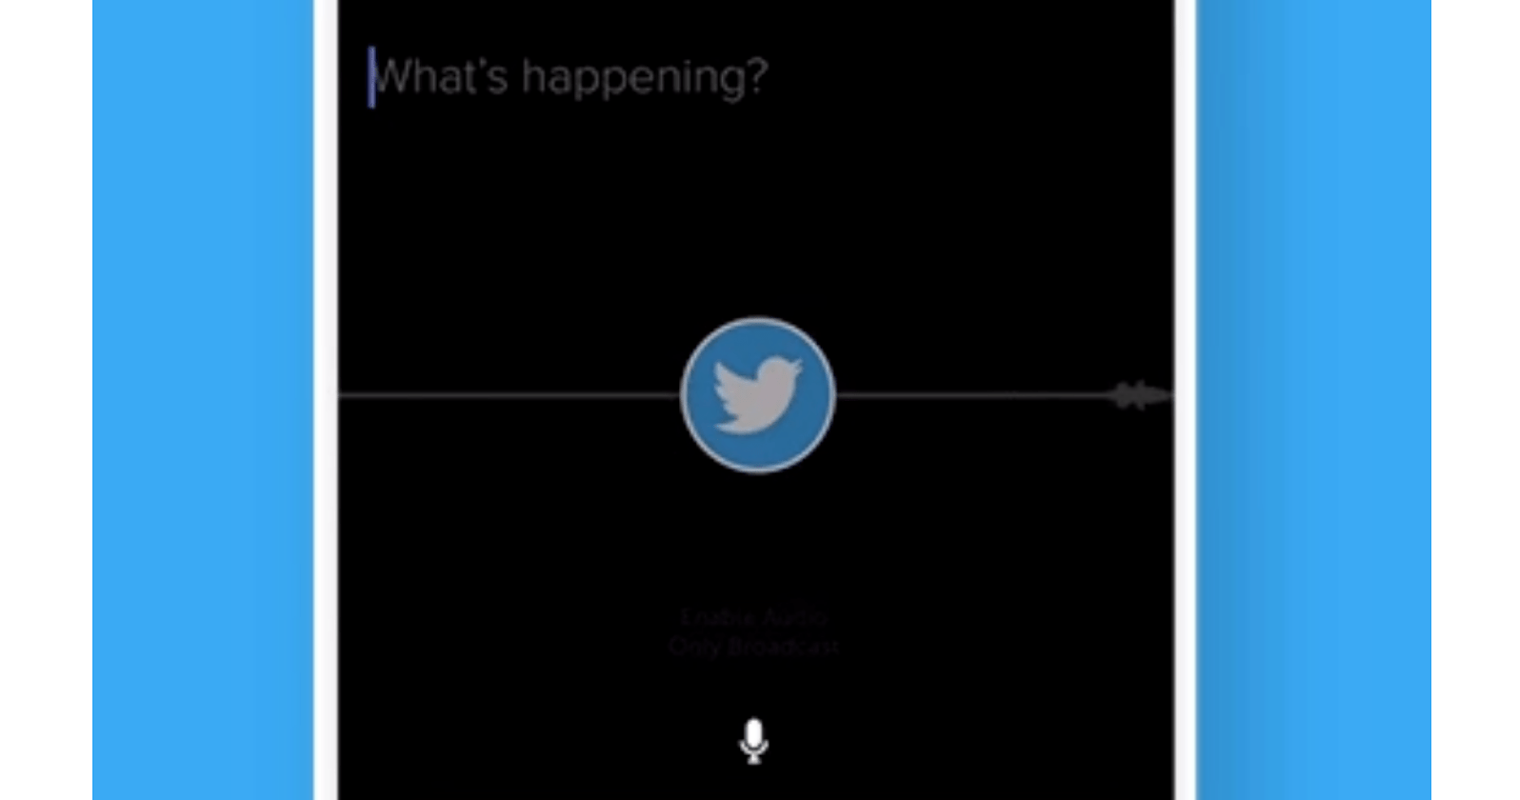 Twitter Adds Audio-Only Live Broadcasting